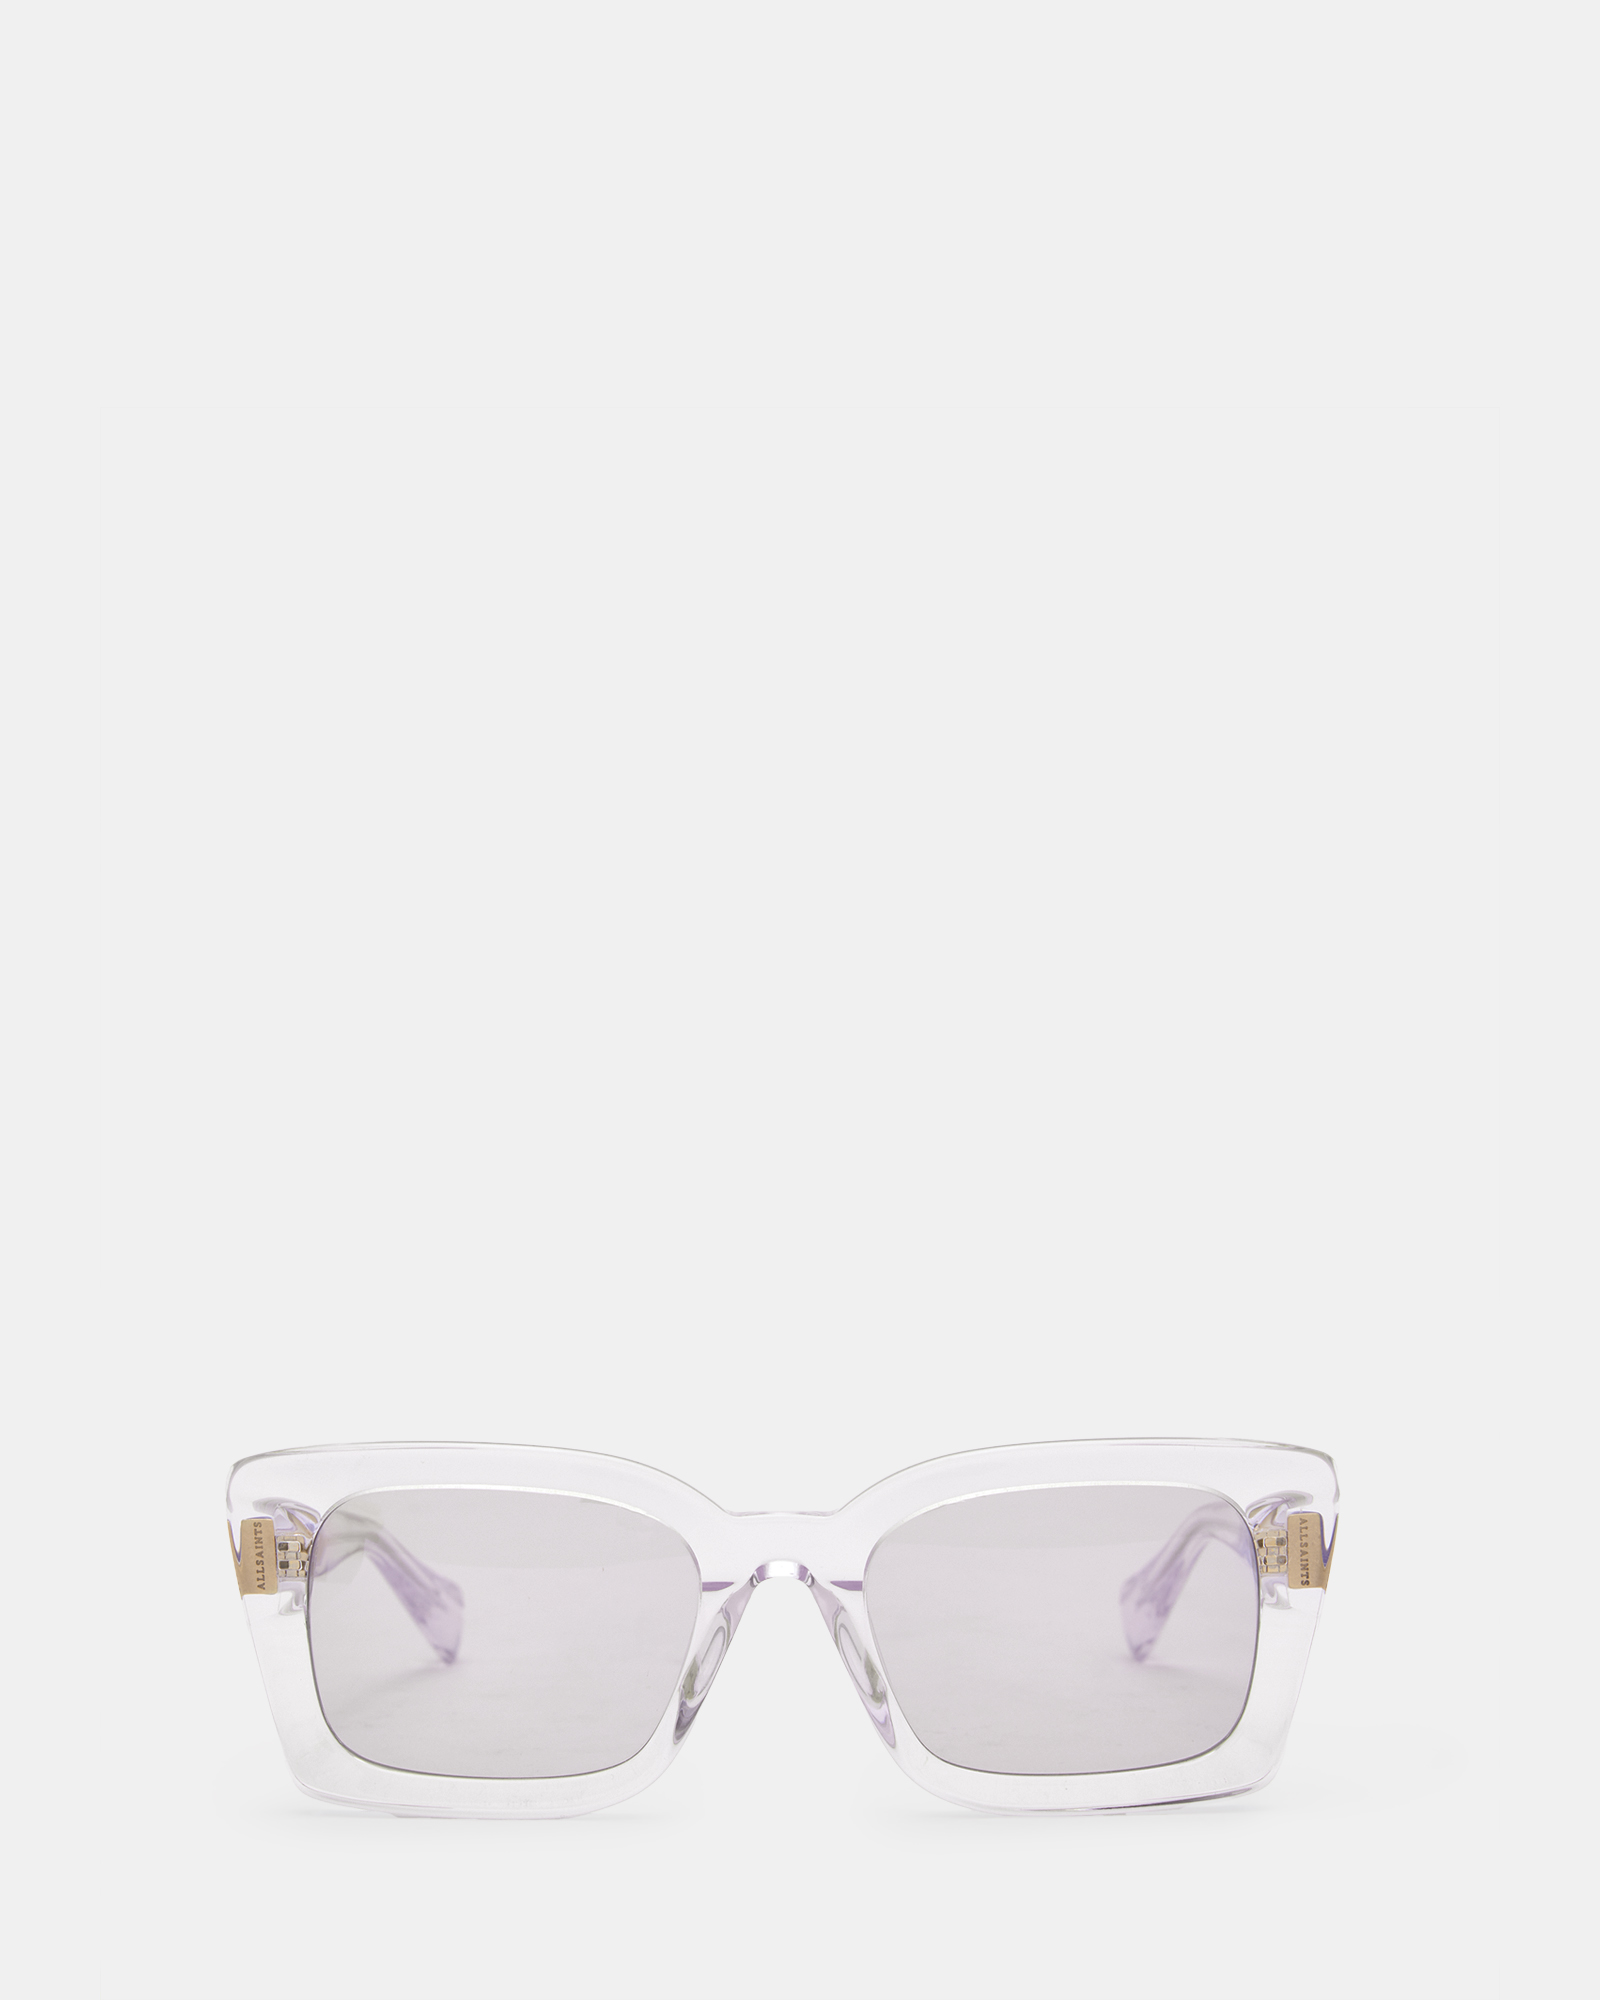 AllSaints Marla Square Bevelled Sunglasses,, SILVER CRYSTAL